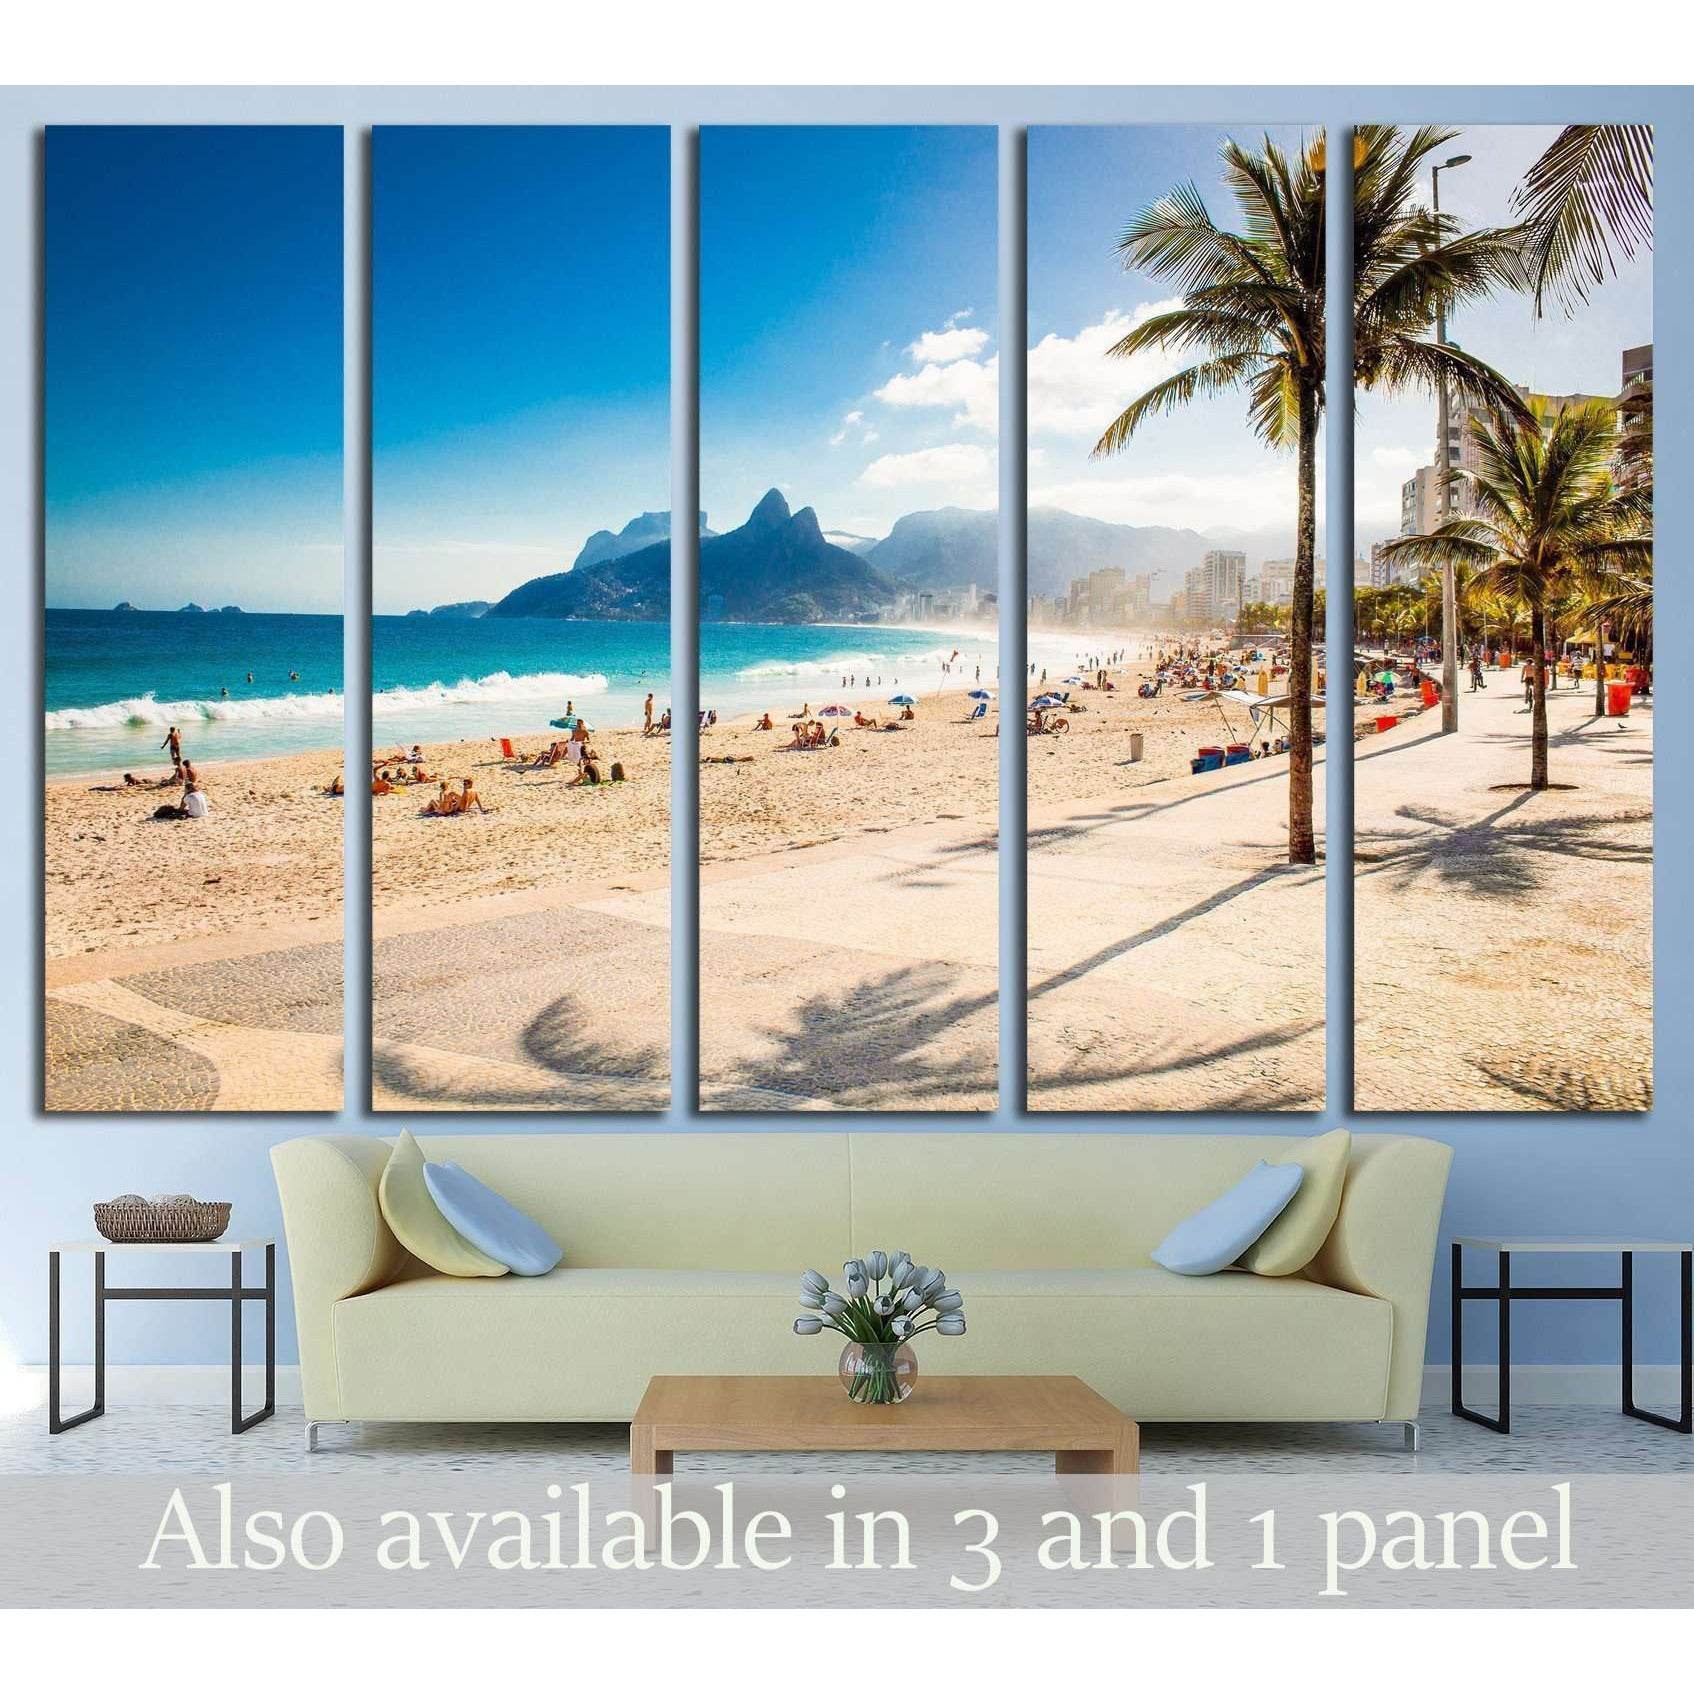 Dois Irmãos Mountains Canvas Art - Panoramic Beach View DecorThis canvas print showcases the iconic Ipanema Beach in Rio de Janeiro, with its vibrant atmosphere and scenic views of the Dois Irmãos mountains. The bustling beach scene with its clear blue sk